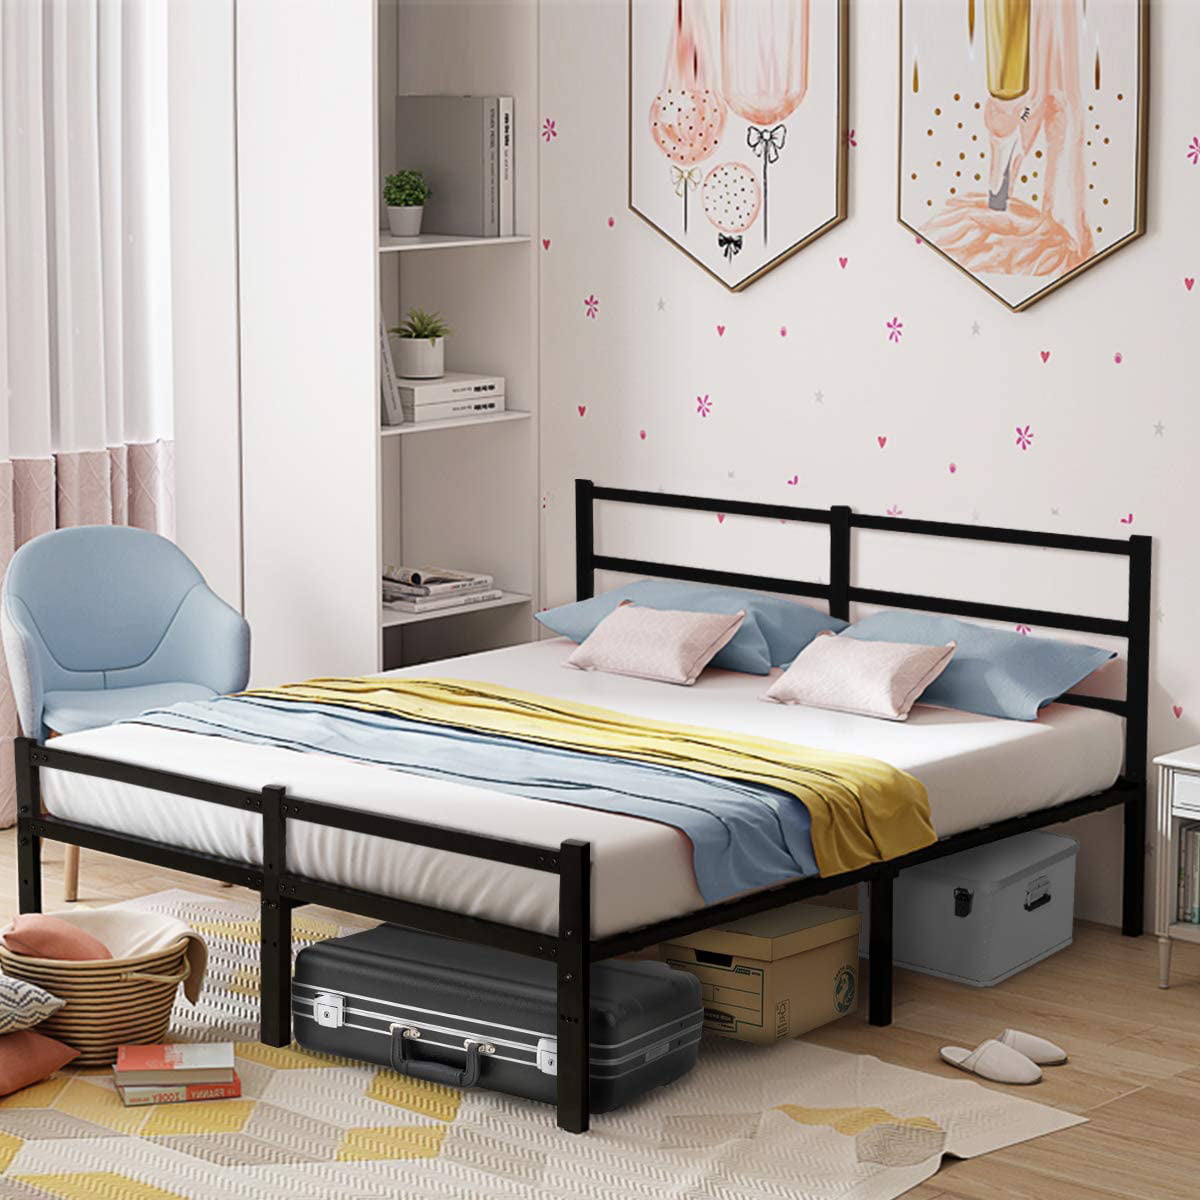 Queen Bed Frames With Headboard Black, Bed Frame With Headboard Storage Queen